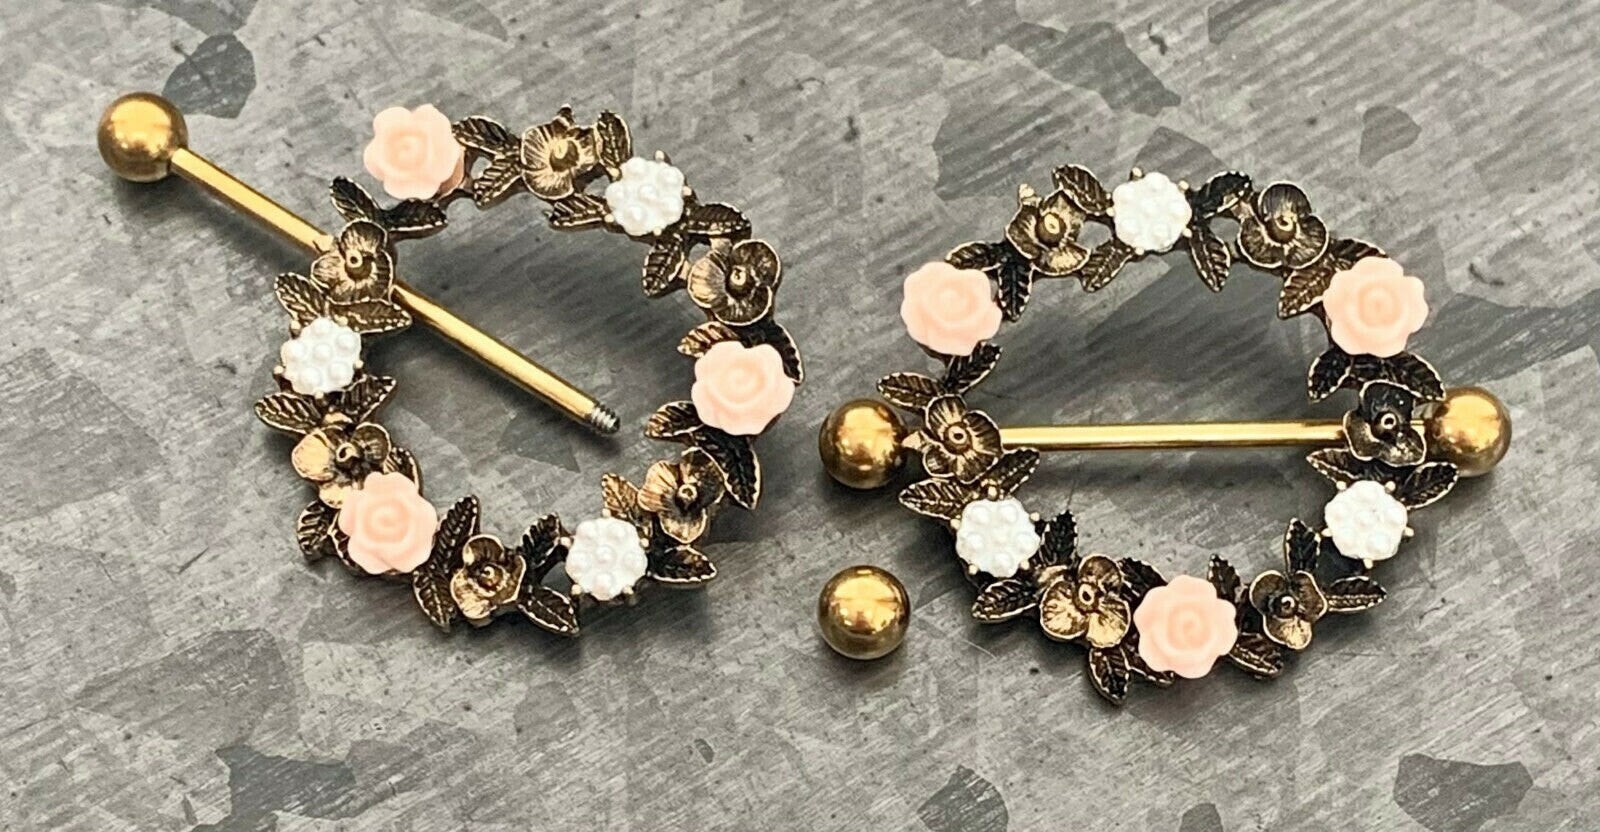 PAIR of Stunning Floral Wreath Steel Barbell Nipple Ring/Shields - Wearable Length 14mm - Barbell Length 28mm - Silver and Gold available!